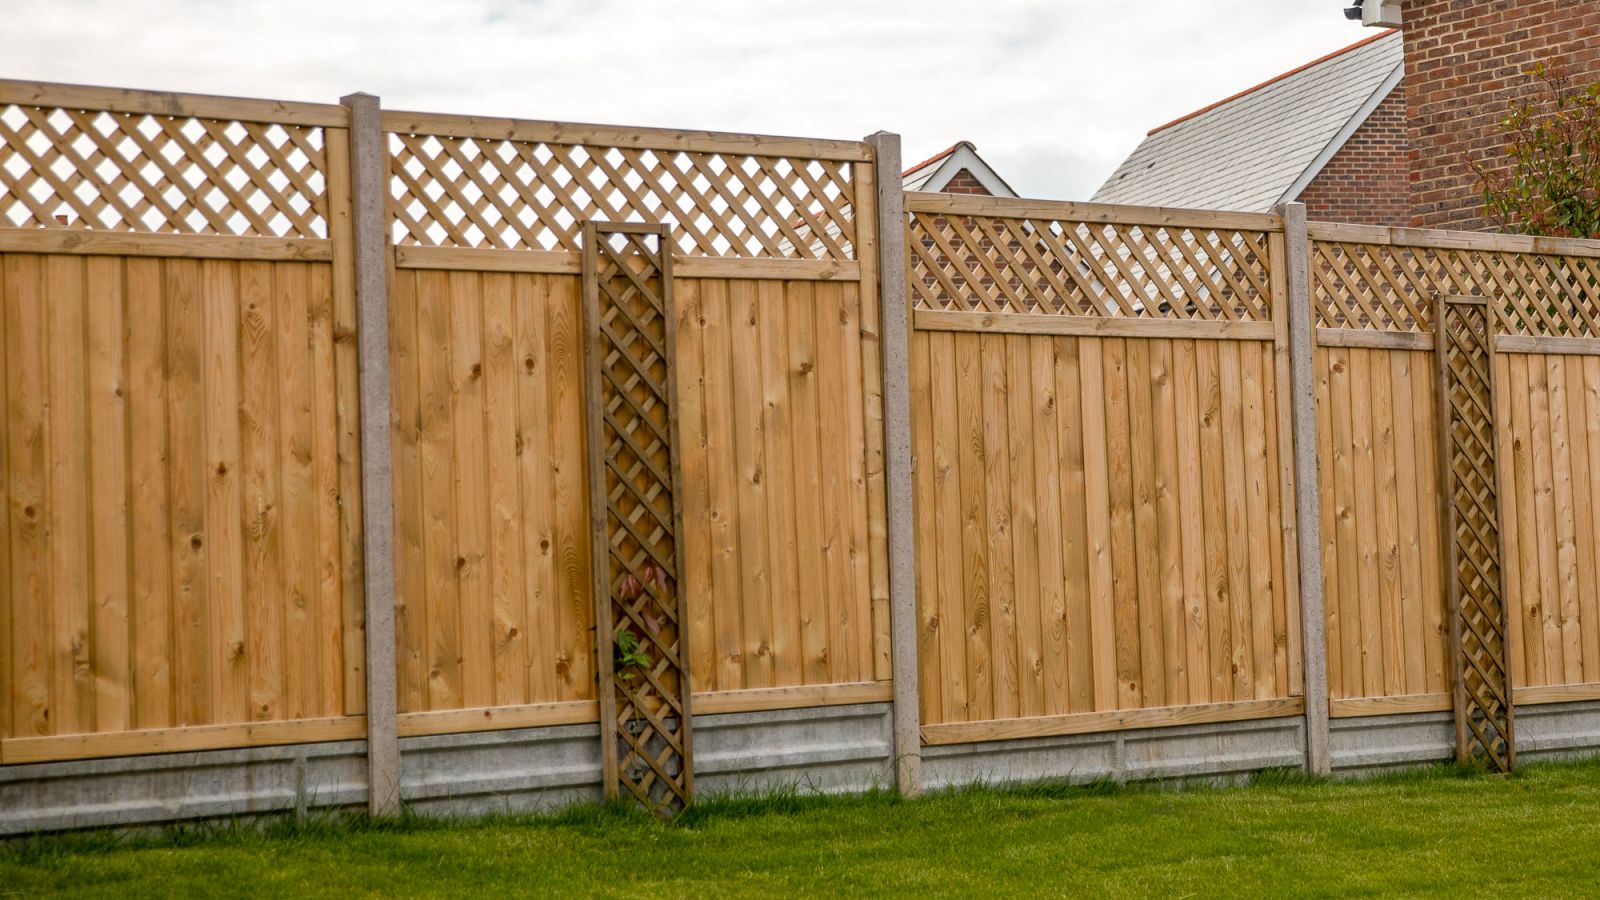 Fencing Contractor In Horsham - Elementree Group Limited